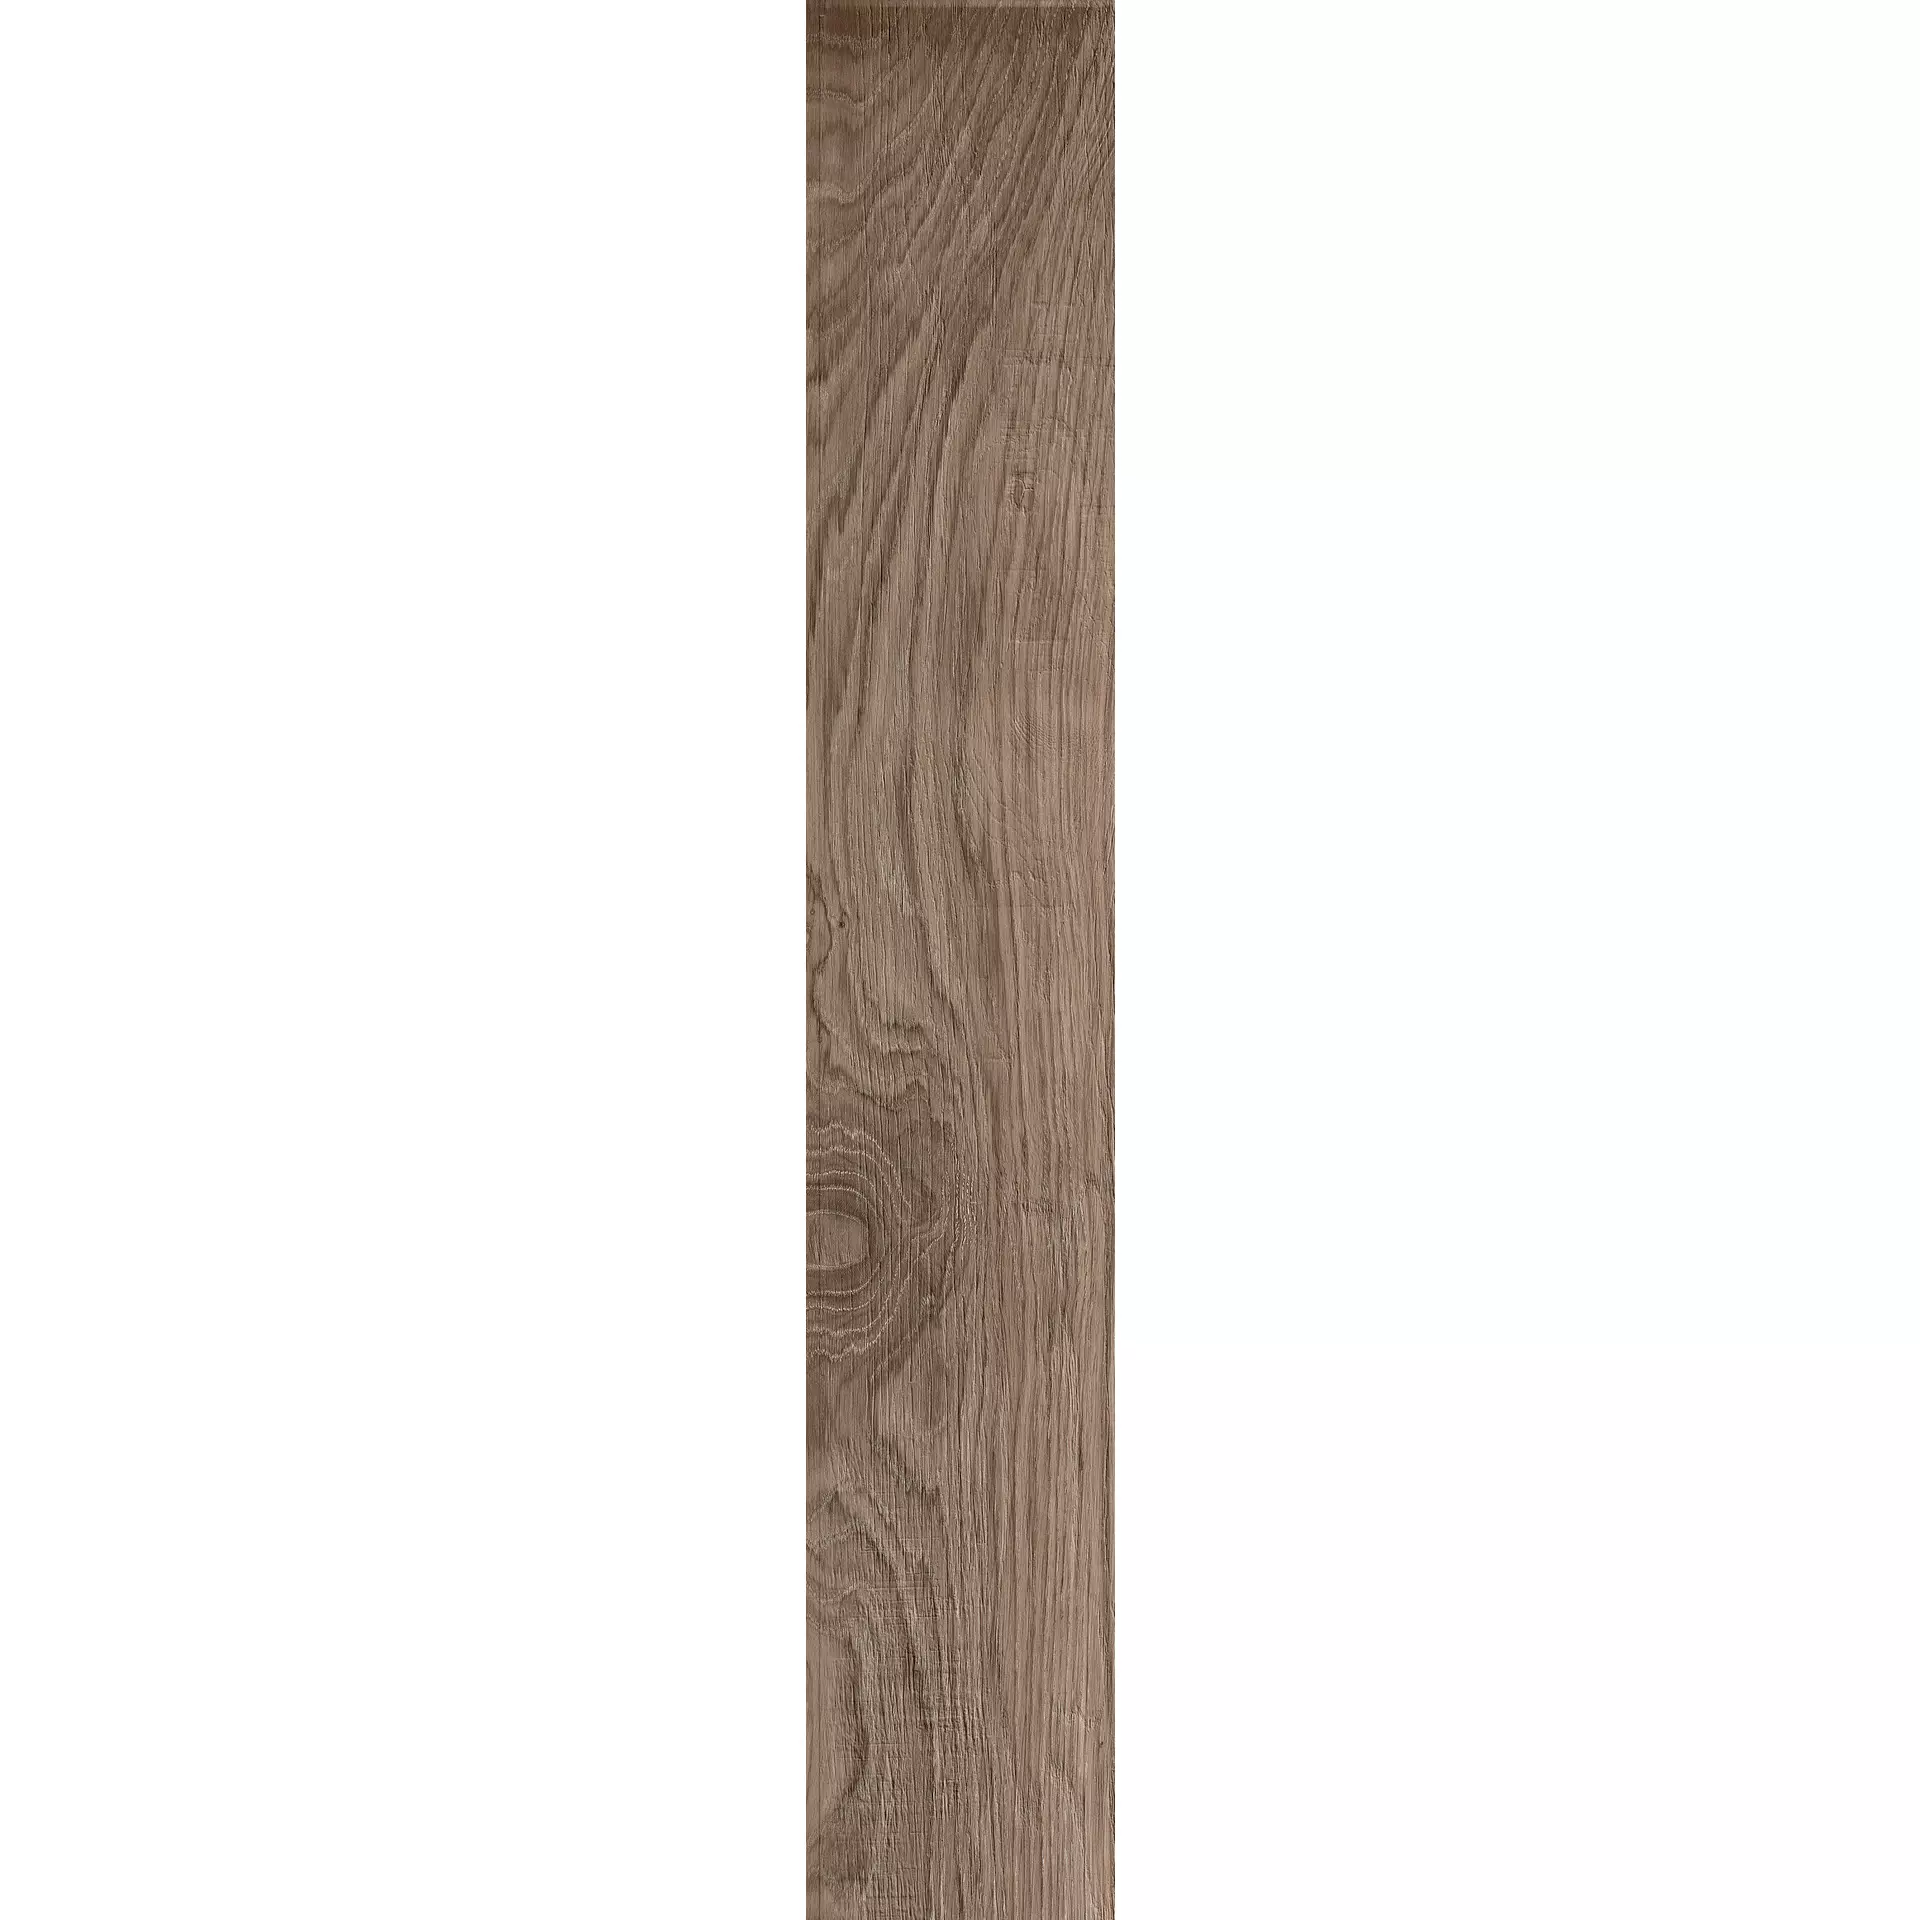 Marazzi Actually Taupe Naturale MC4Y 14,5x90cm rectified 8mm